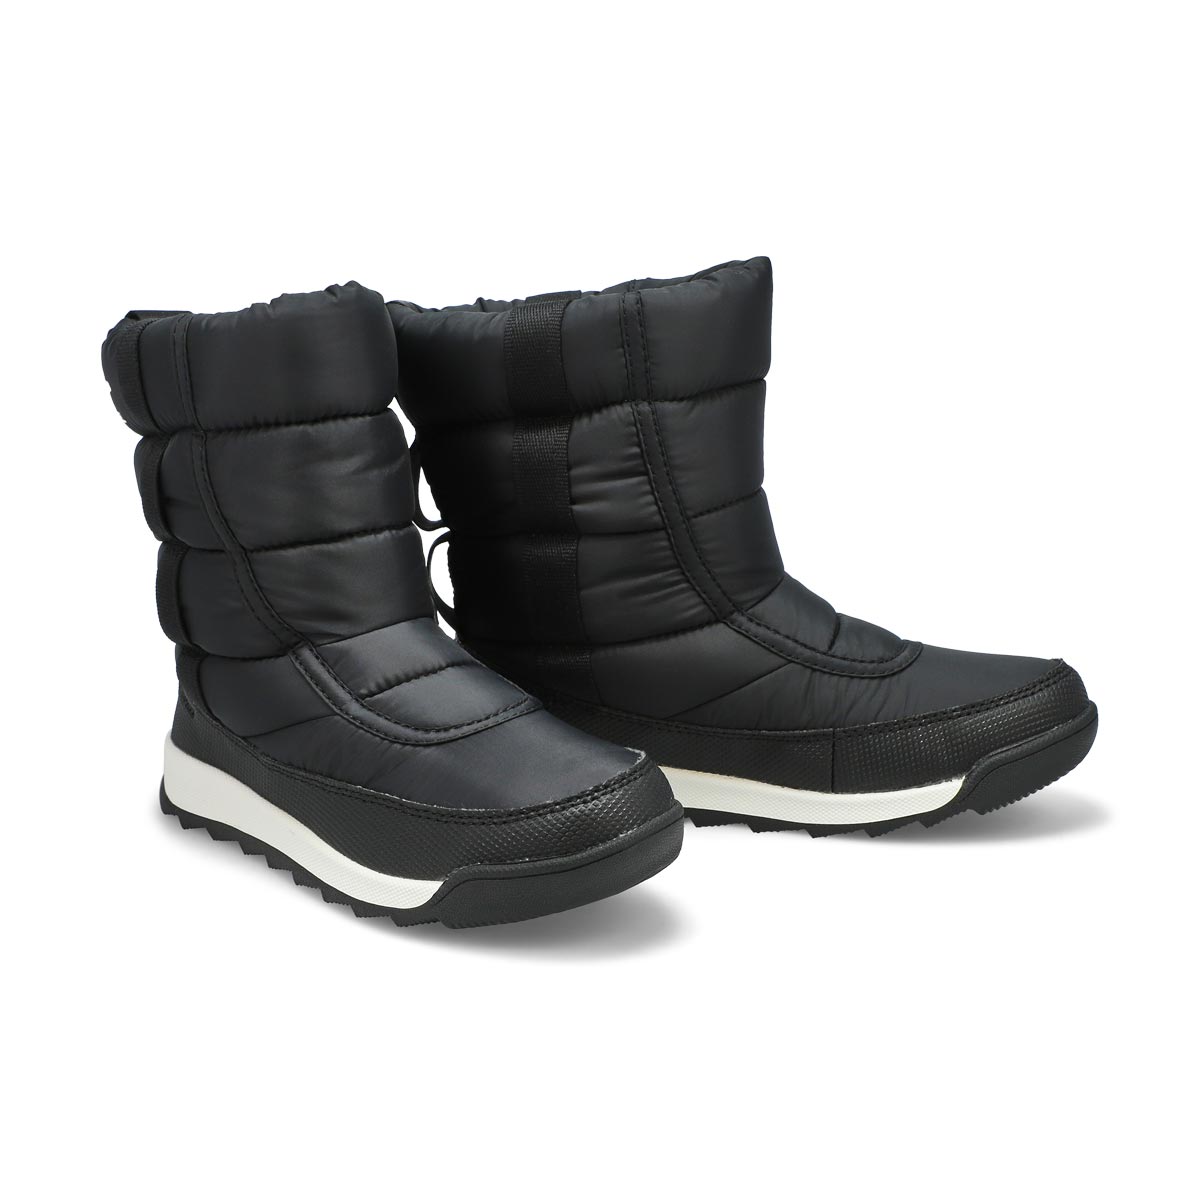 Botte imperméable Whitney II Puffy Mid, nr, fille